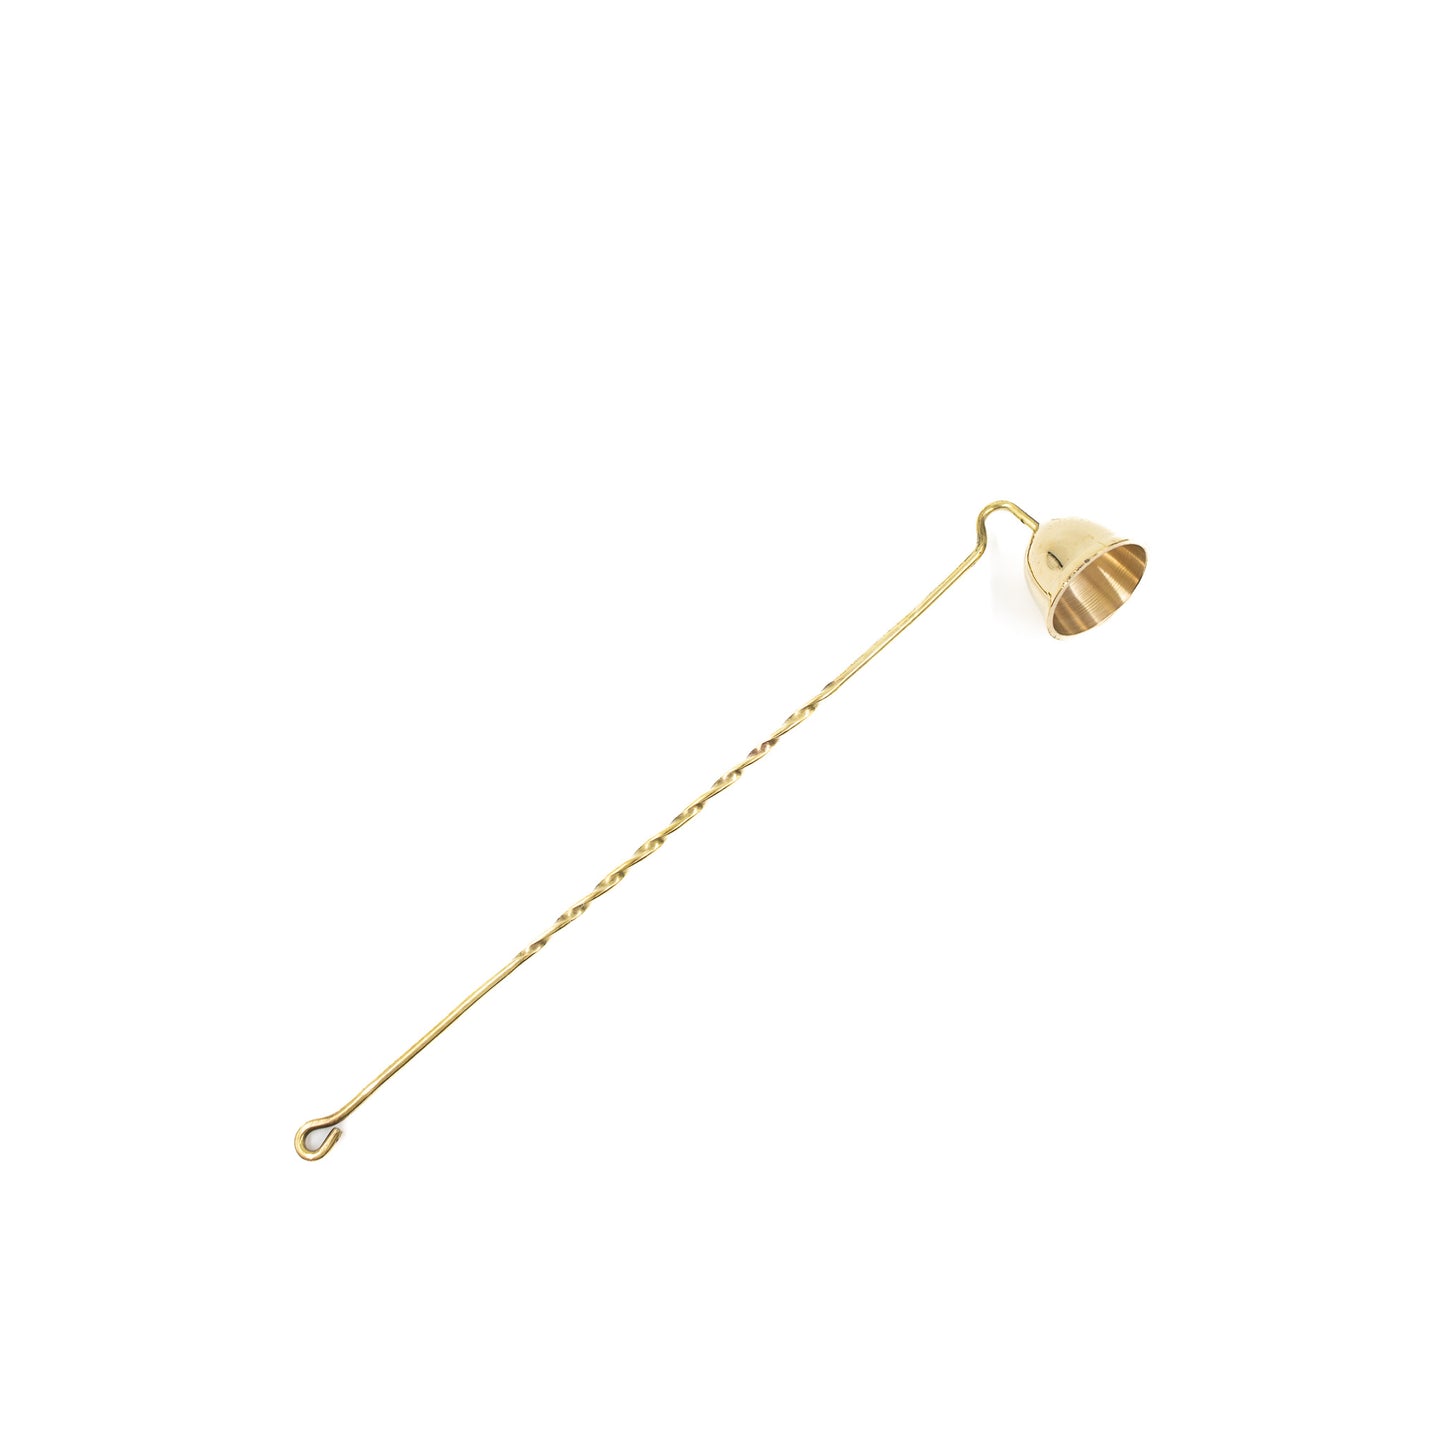 Heirloom Candle Snuffer